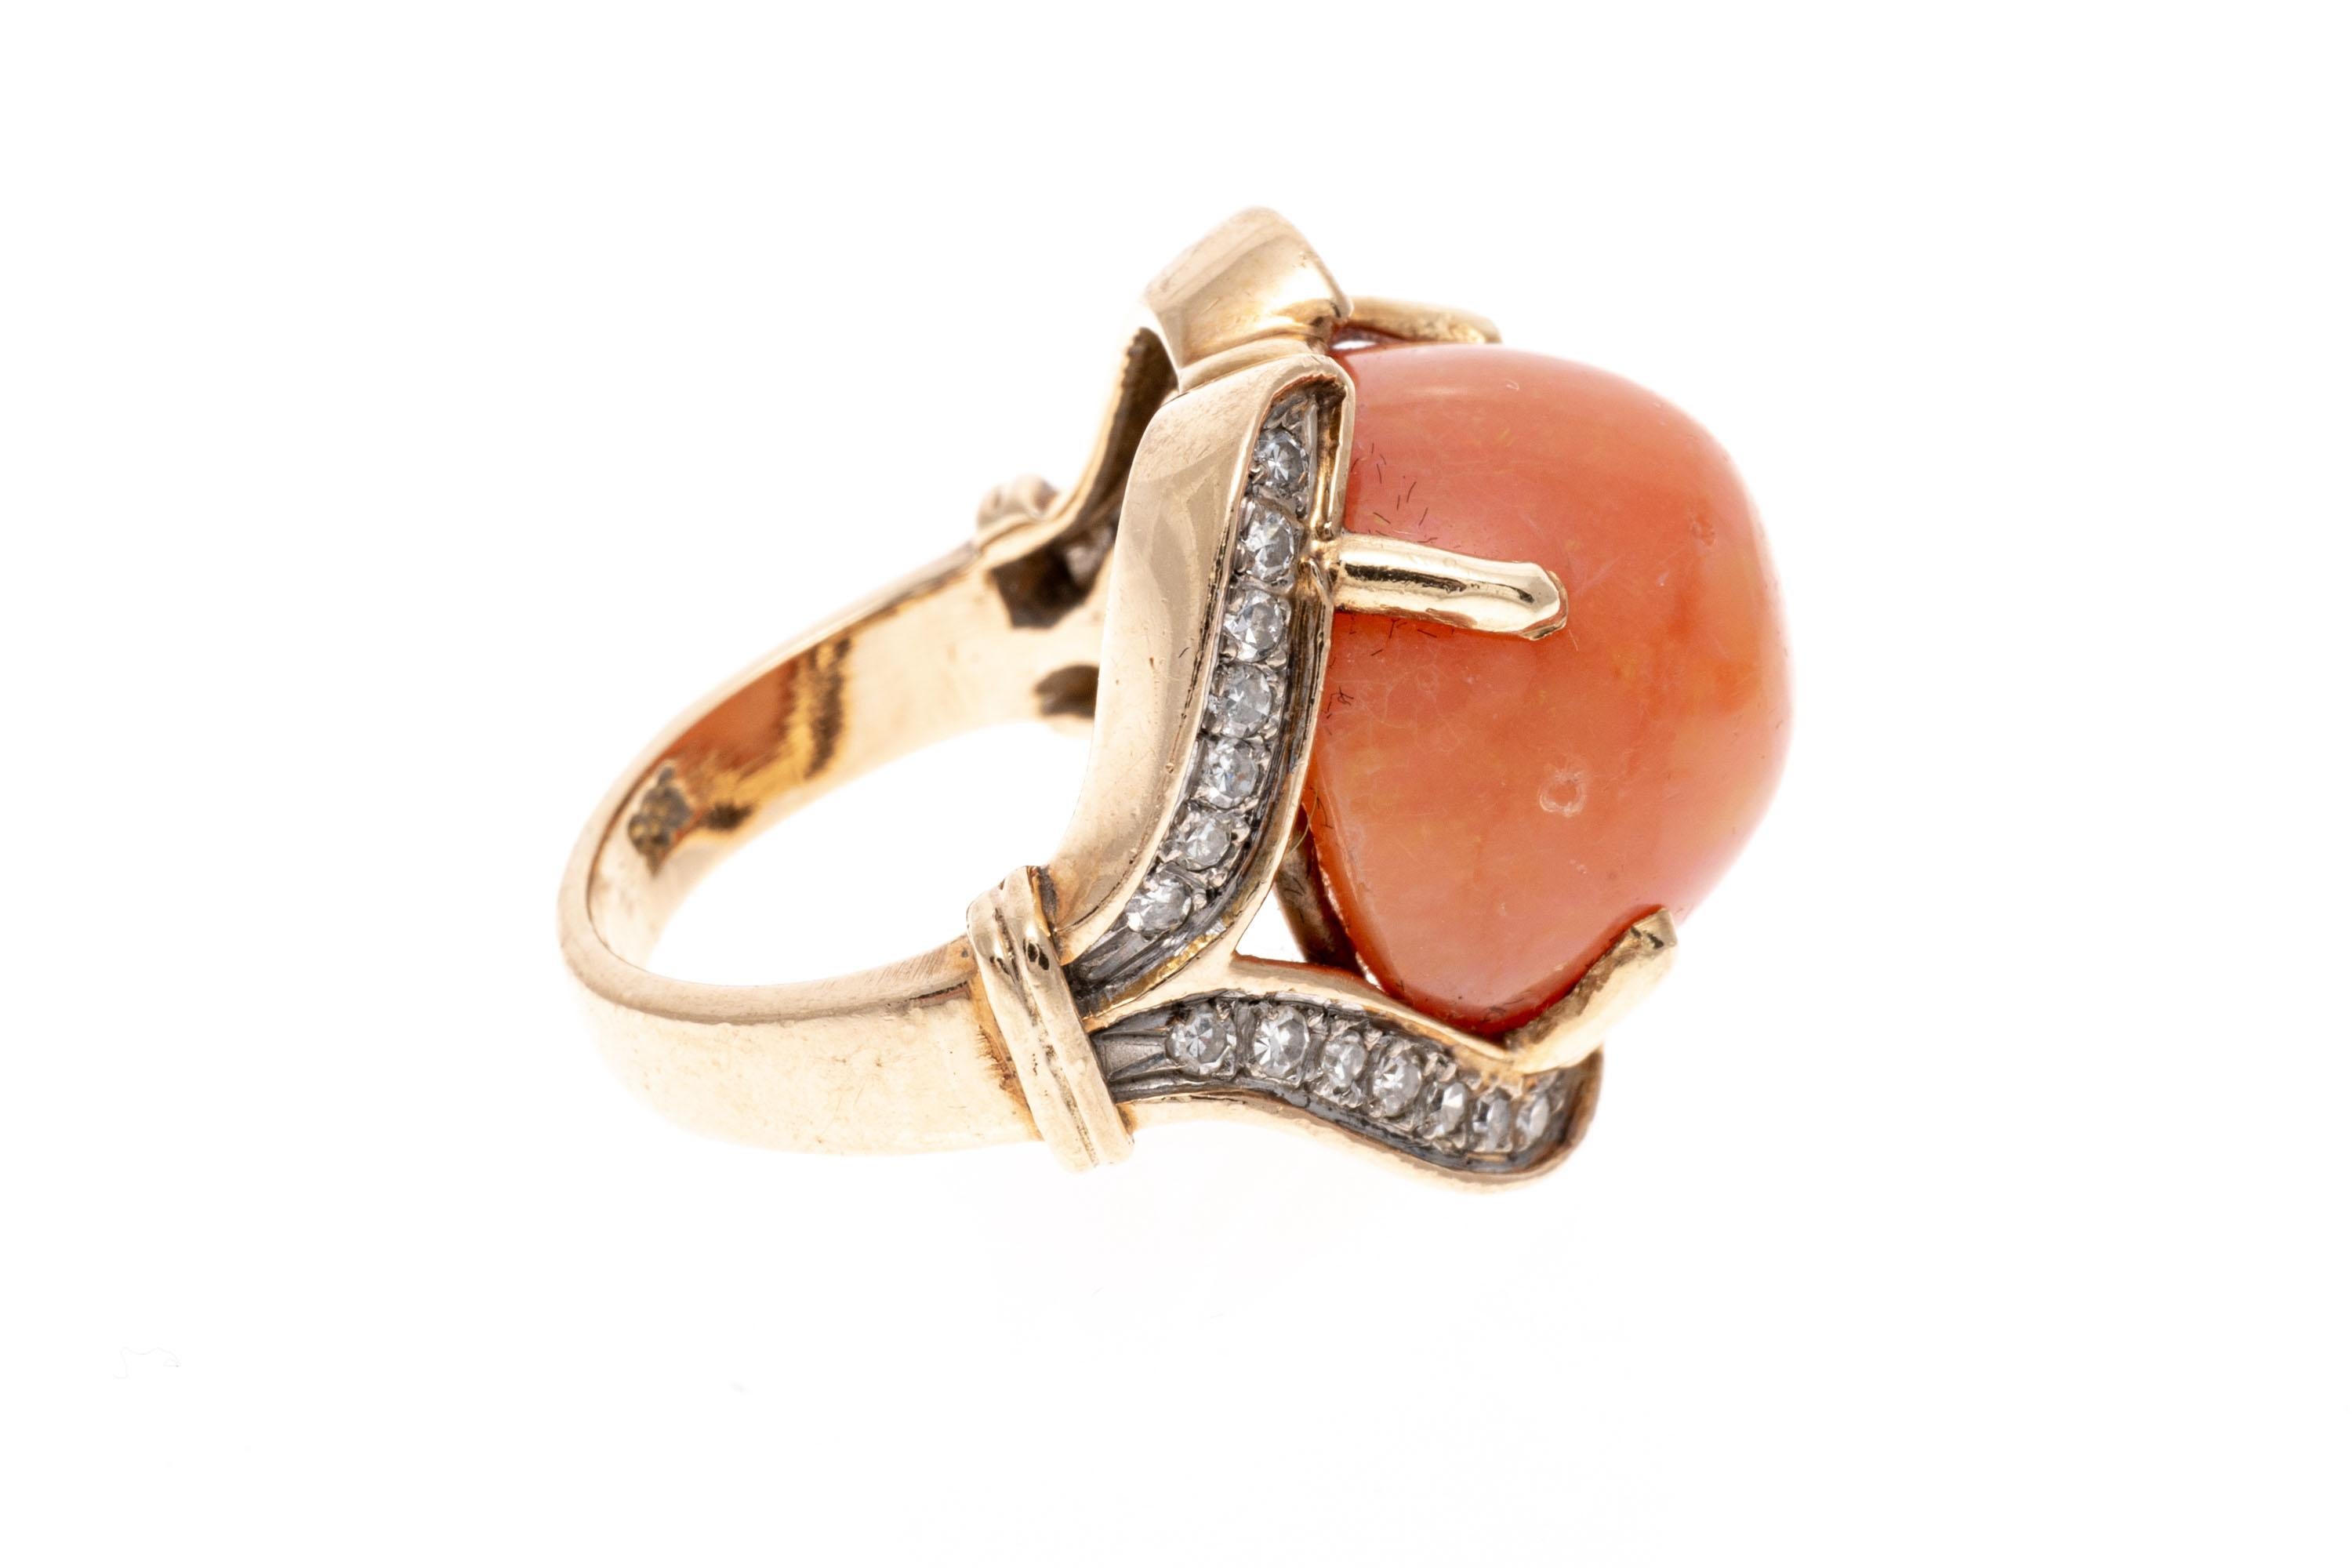 Women's 14k Gold Stunning Orange Fire Opal (App. 10.9 CTS) And Diamond Ring For Sale